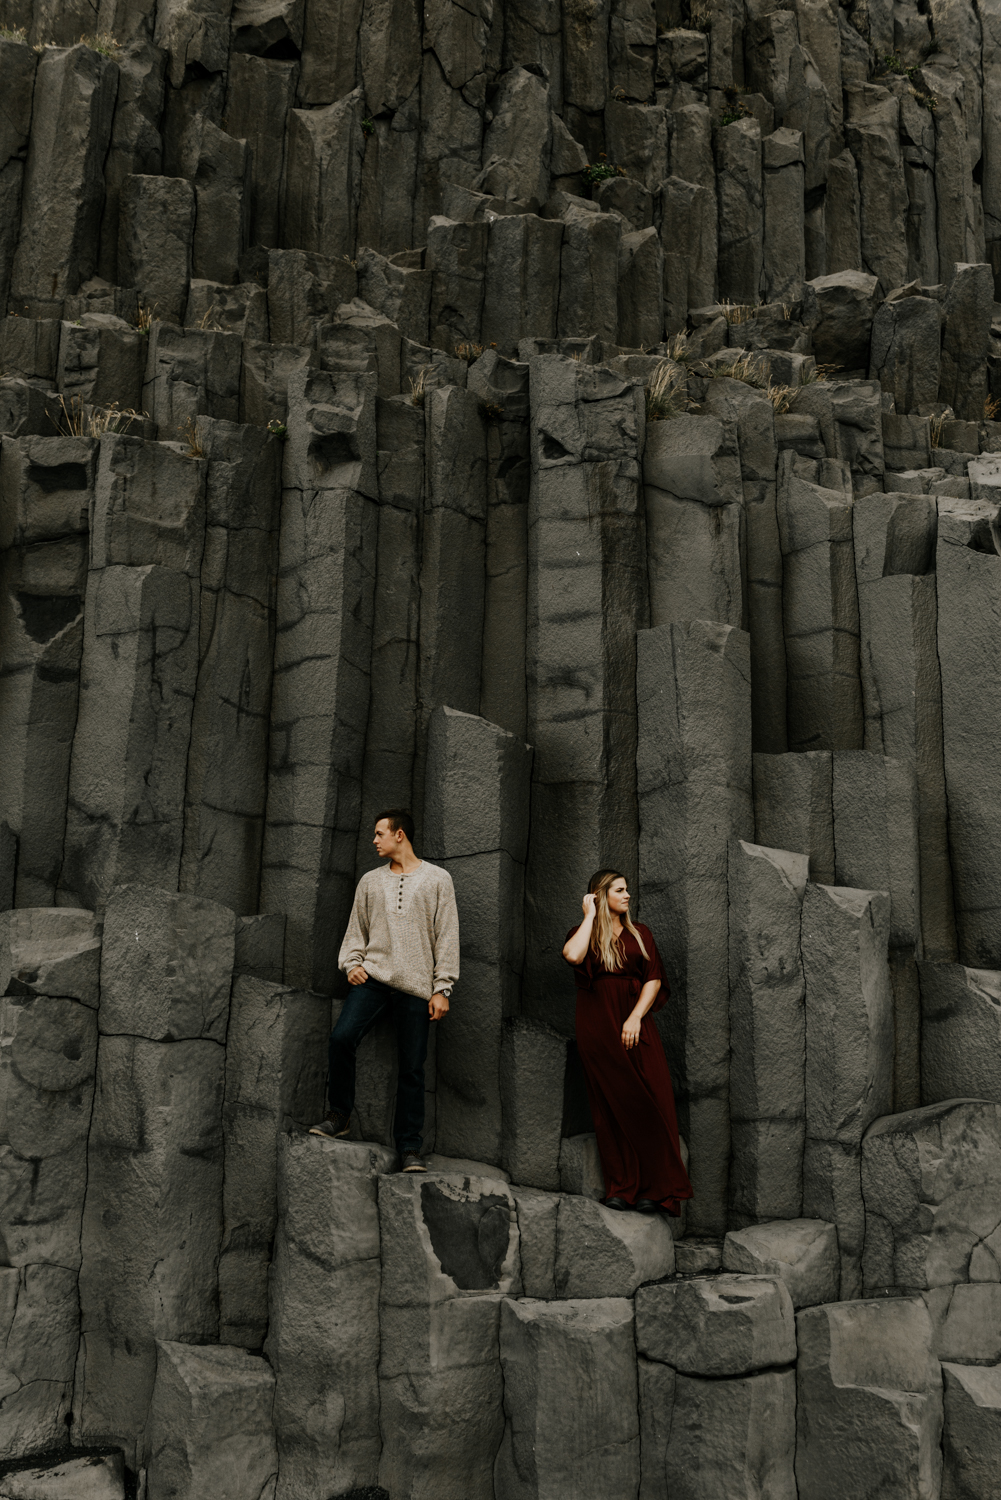 Vik, Anniversary Ideas and Adventure Photo session in Iceland